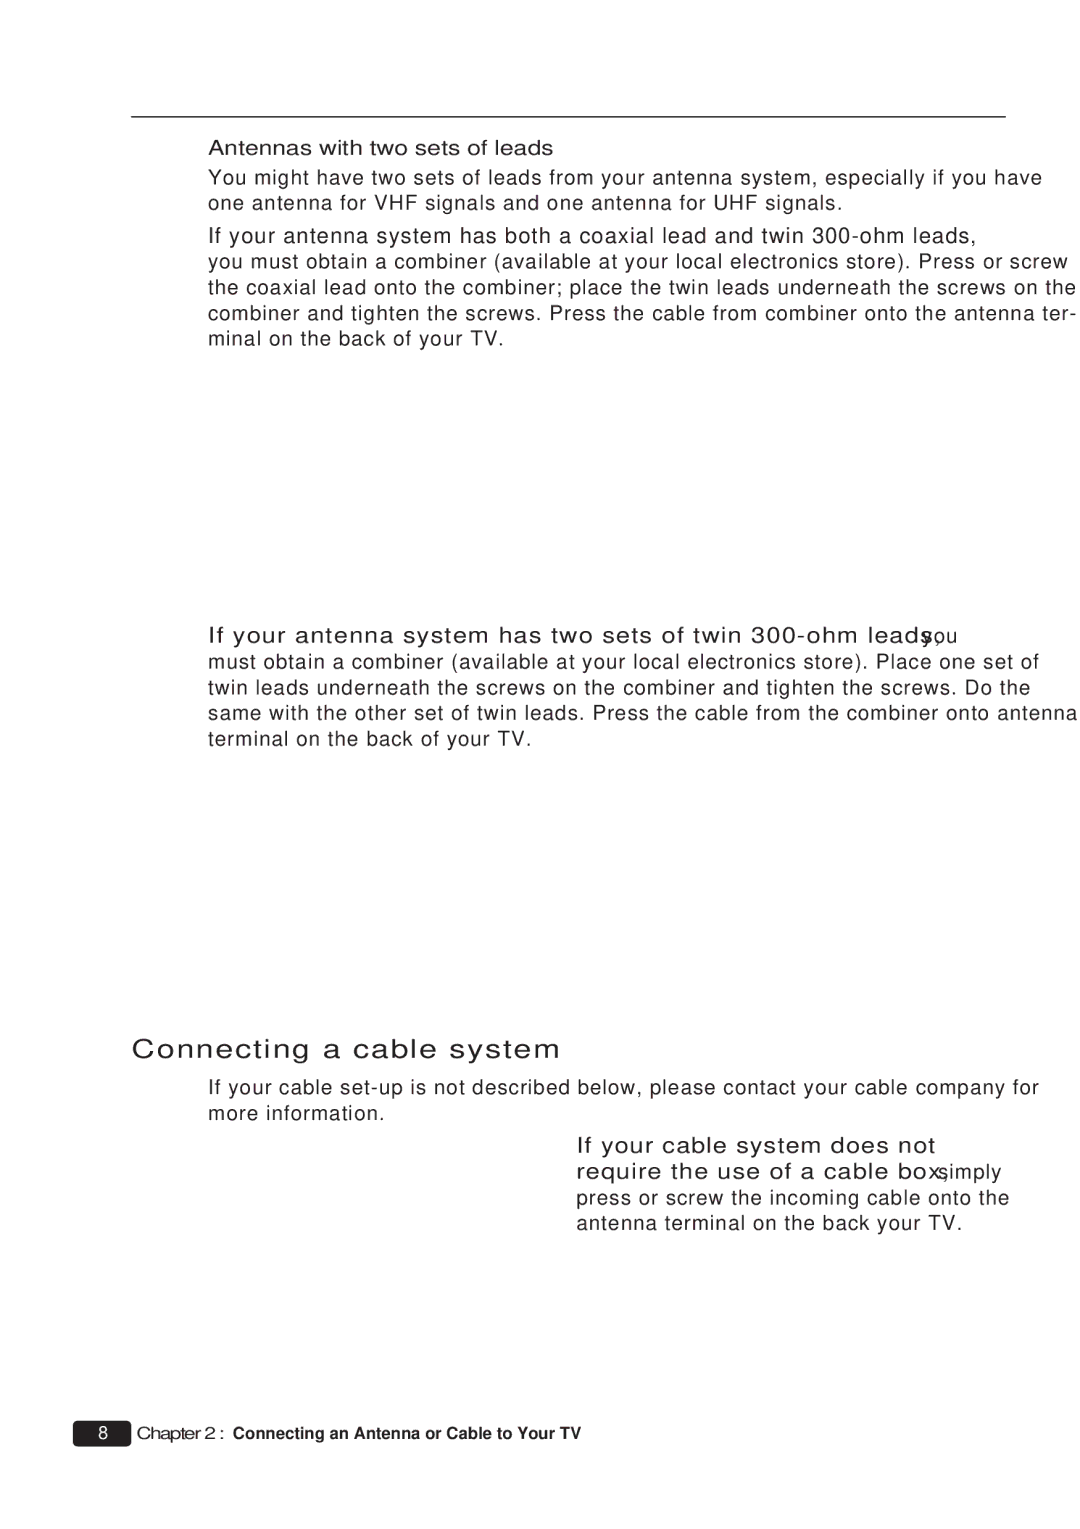 Daewoo DTQ 13P2FC instruction manual Connecting a cable system, Antennas with two sets of leads 